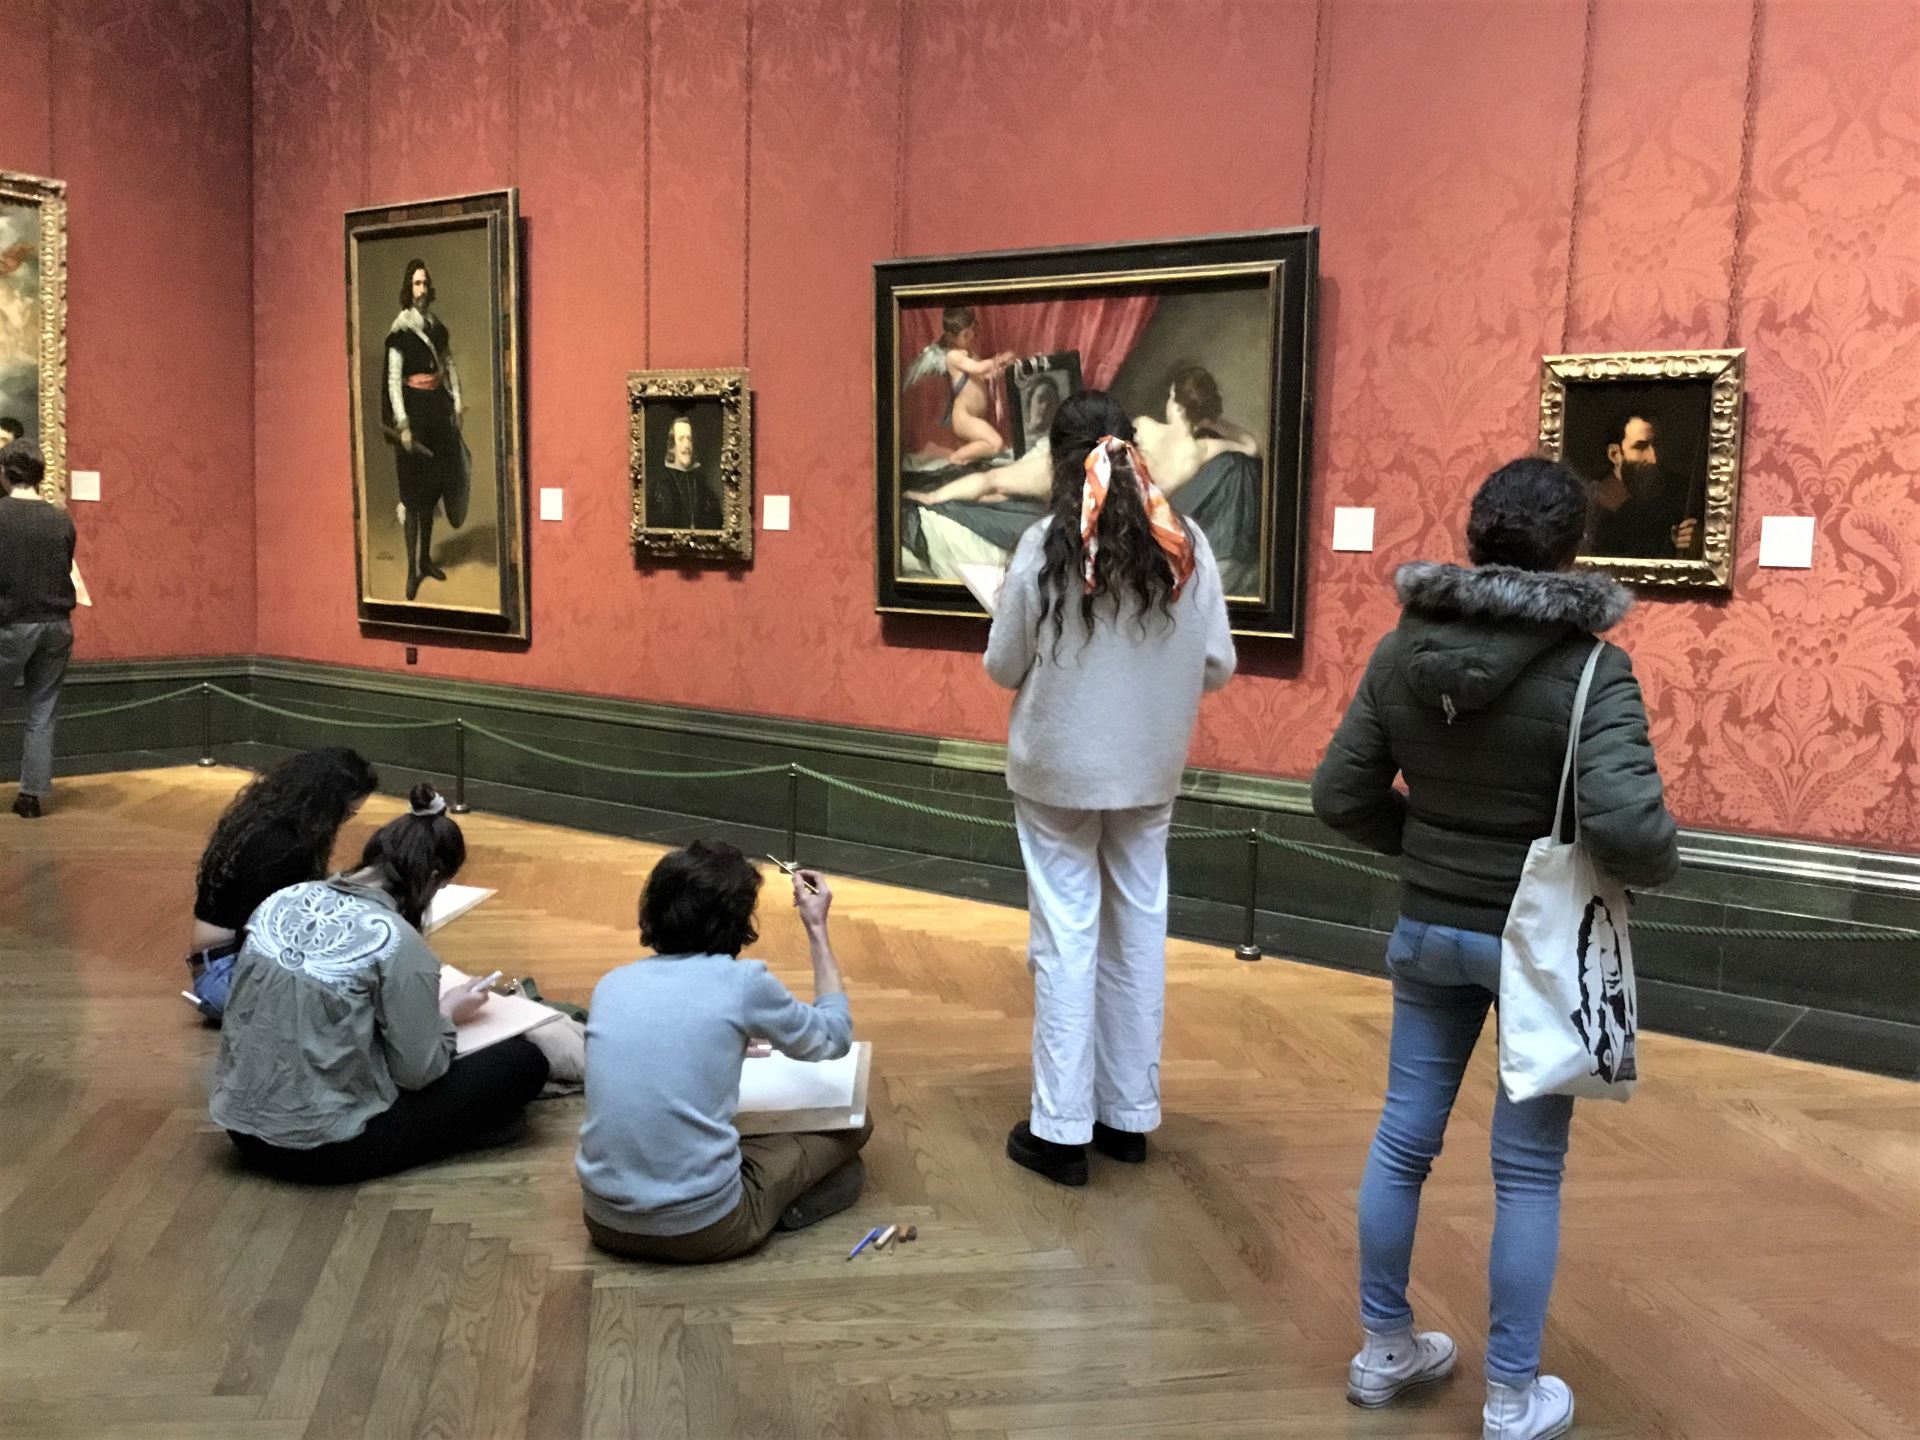 Trainees in the National Gallery drawing